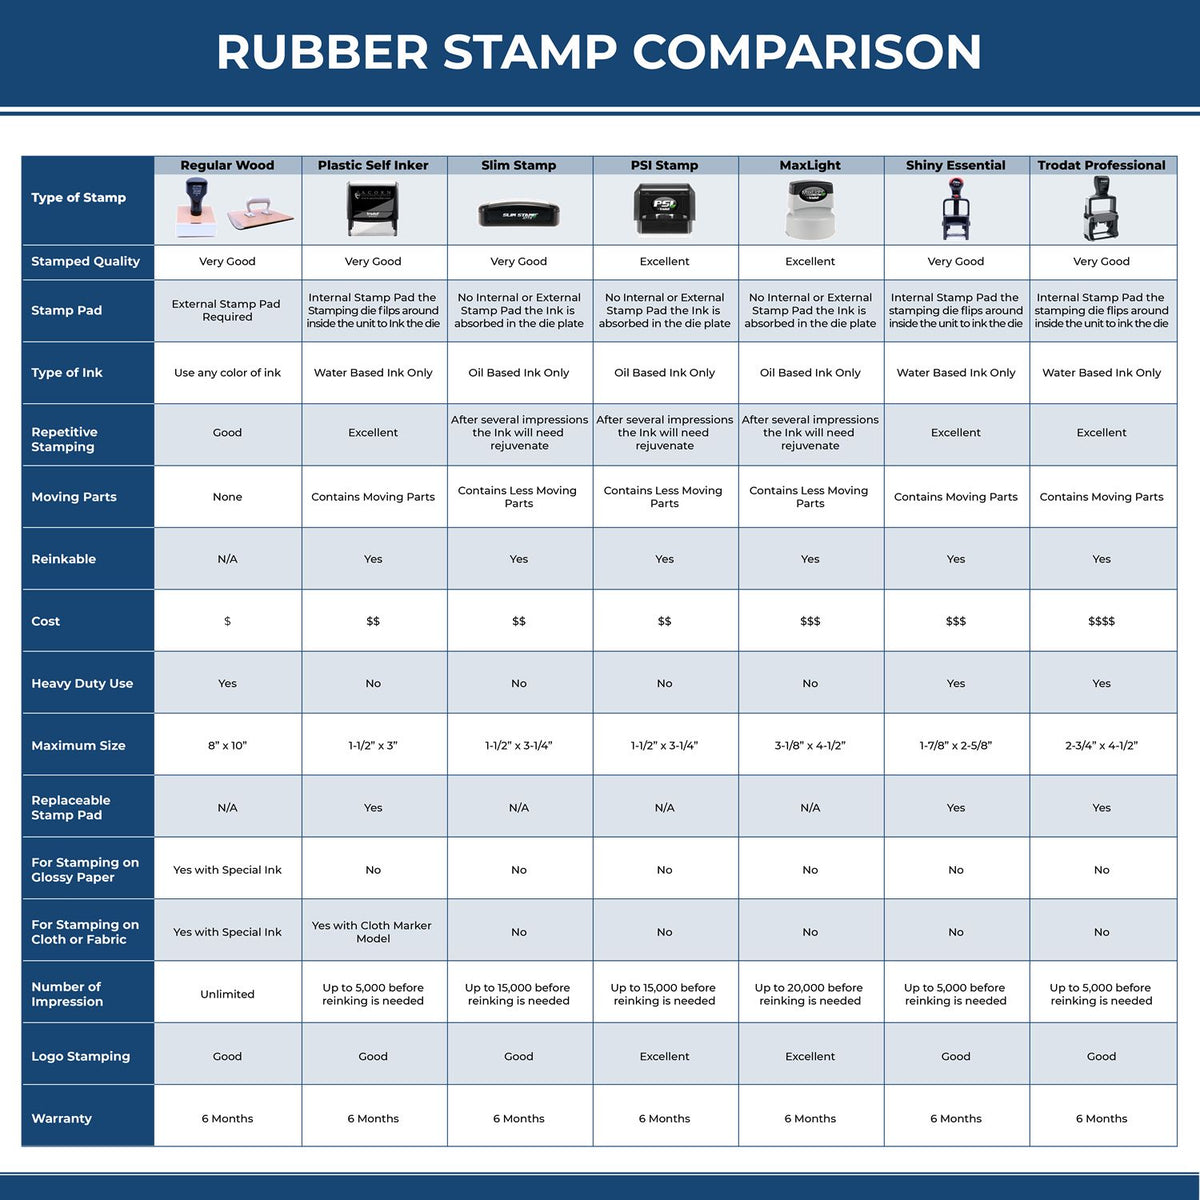 A comparison chart for the different types of mount models available for the MaxLight Premium Pre-Inked Iowa State Seal Notarial Stamp.